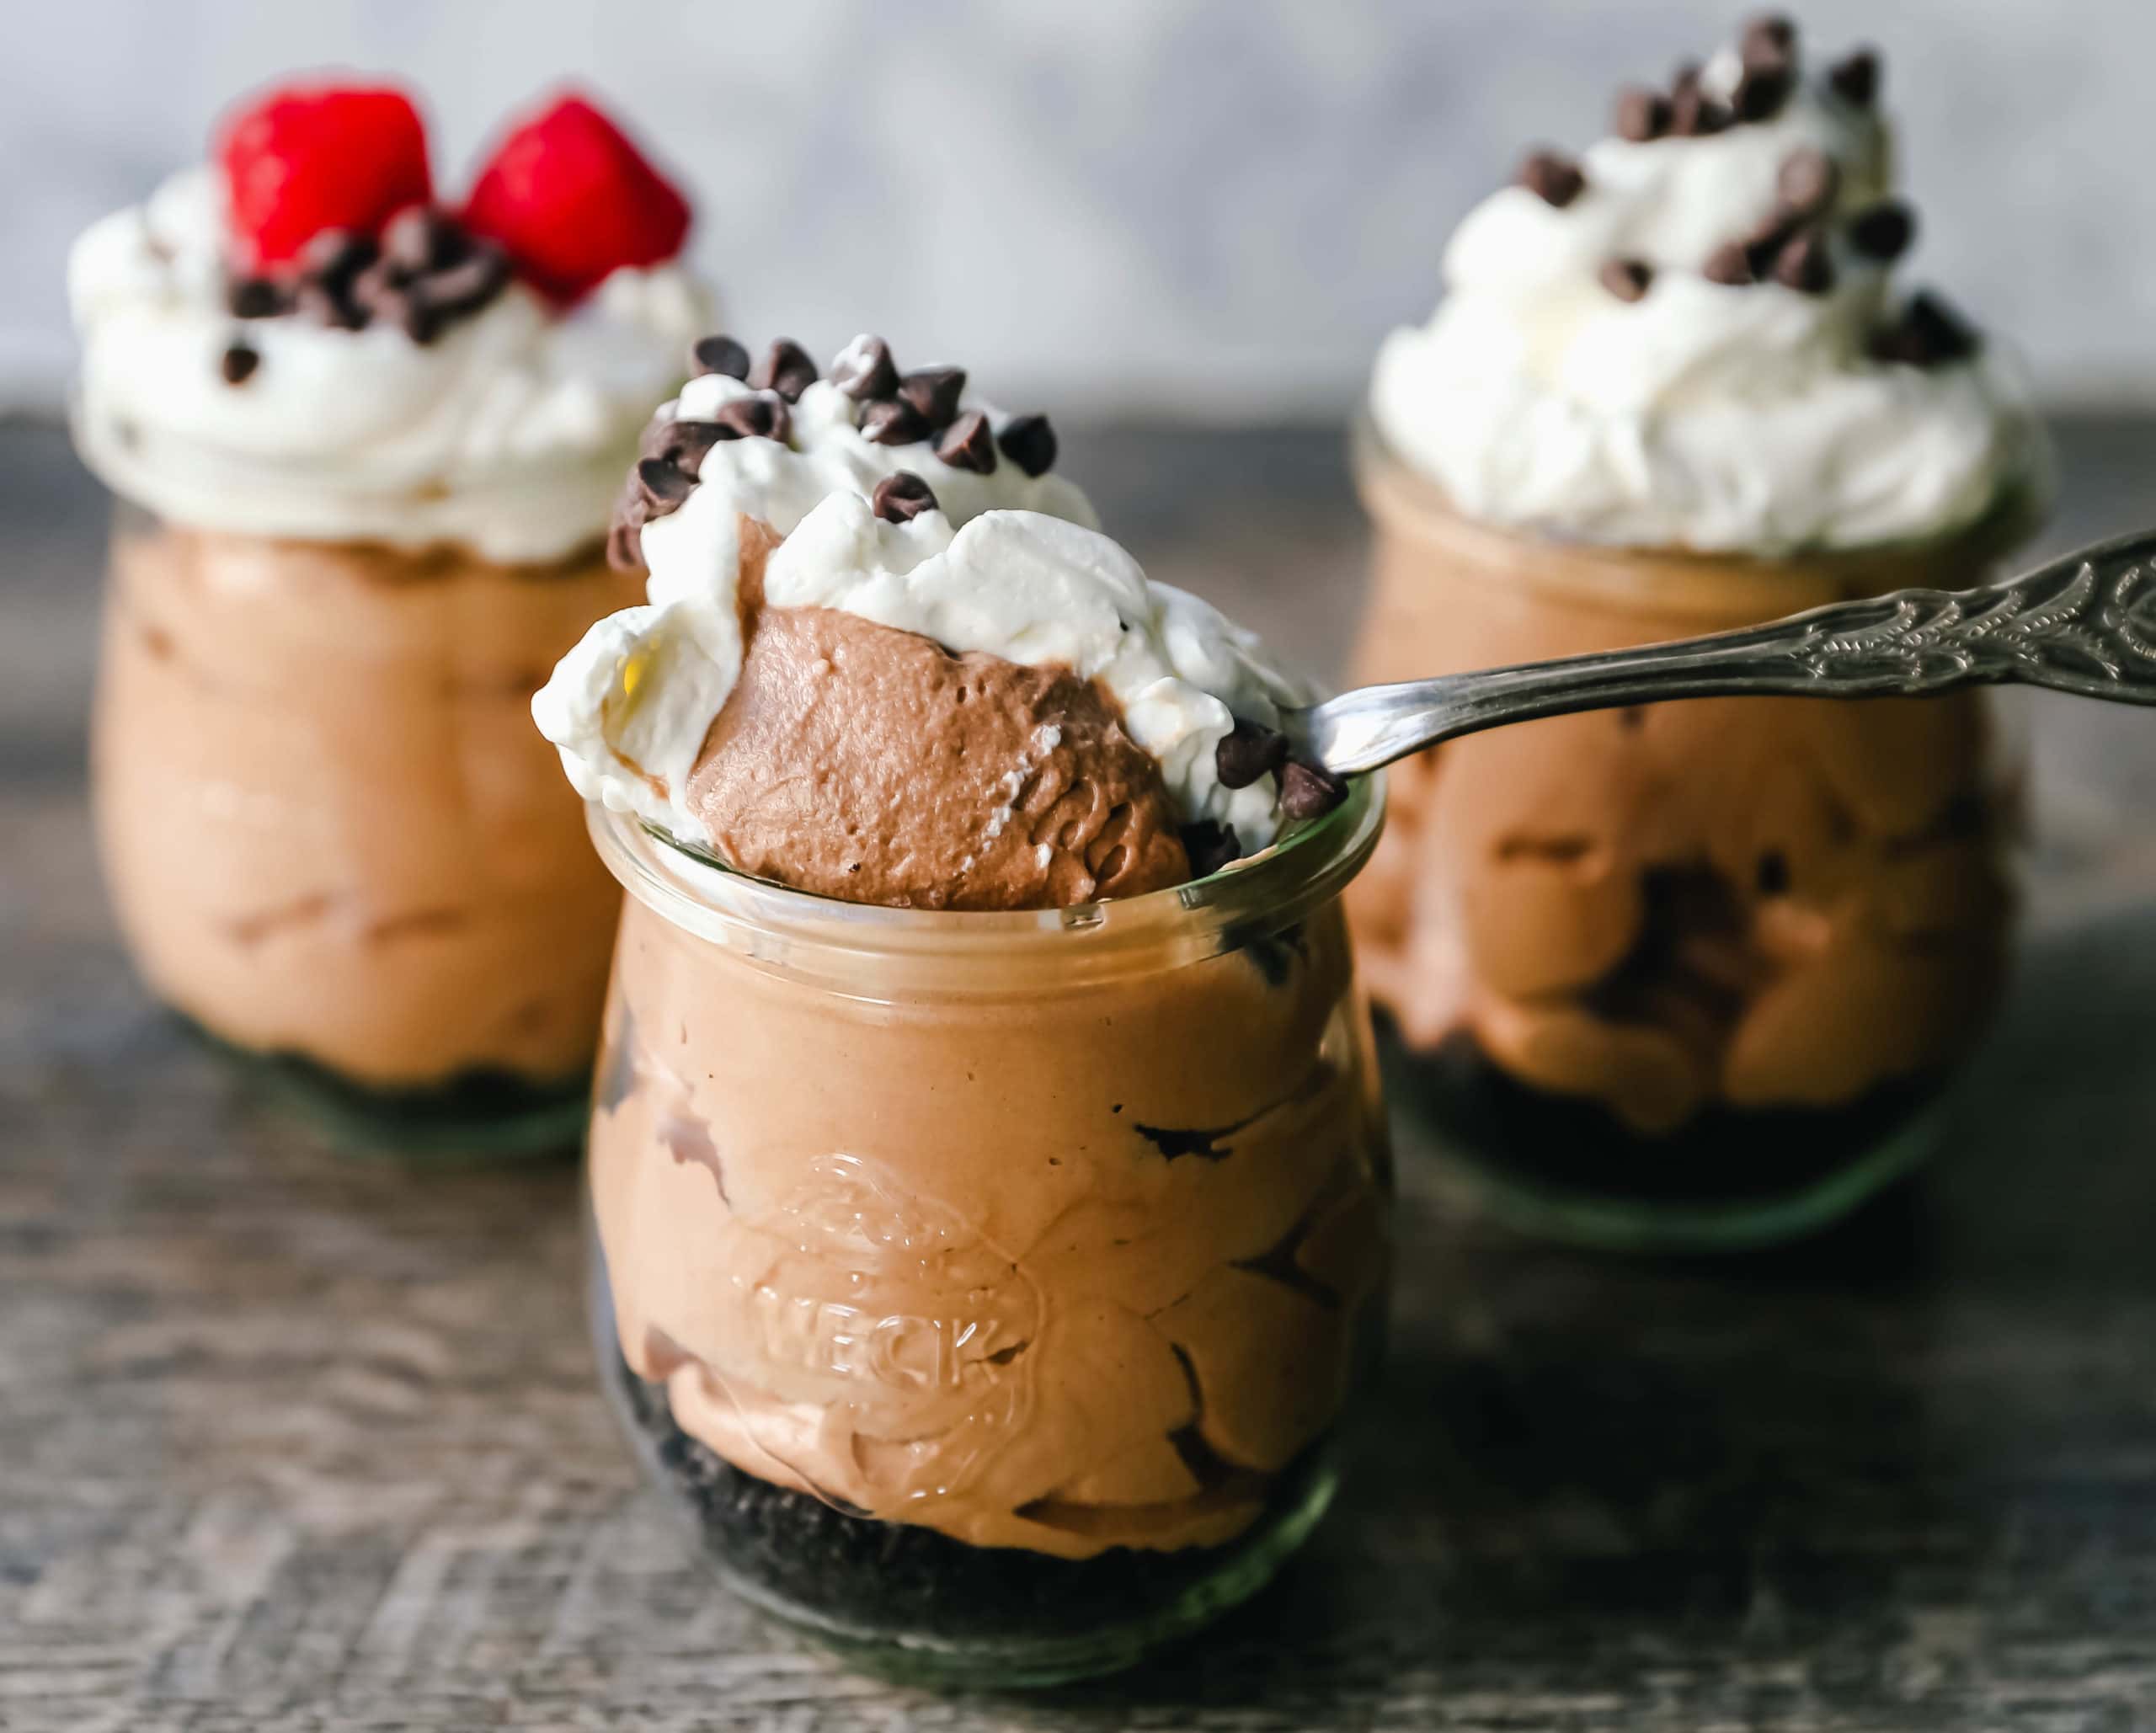 Chocolate Nutella Cheesecake Mousse No-Bake 5-Minute Chocolate Nutella Mousse made with only four ingredients -- Nutella, cream cheese, heavy cream, and powdered sugar.  www.modernhoney.com #mousse #chocolatemousse #dessert